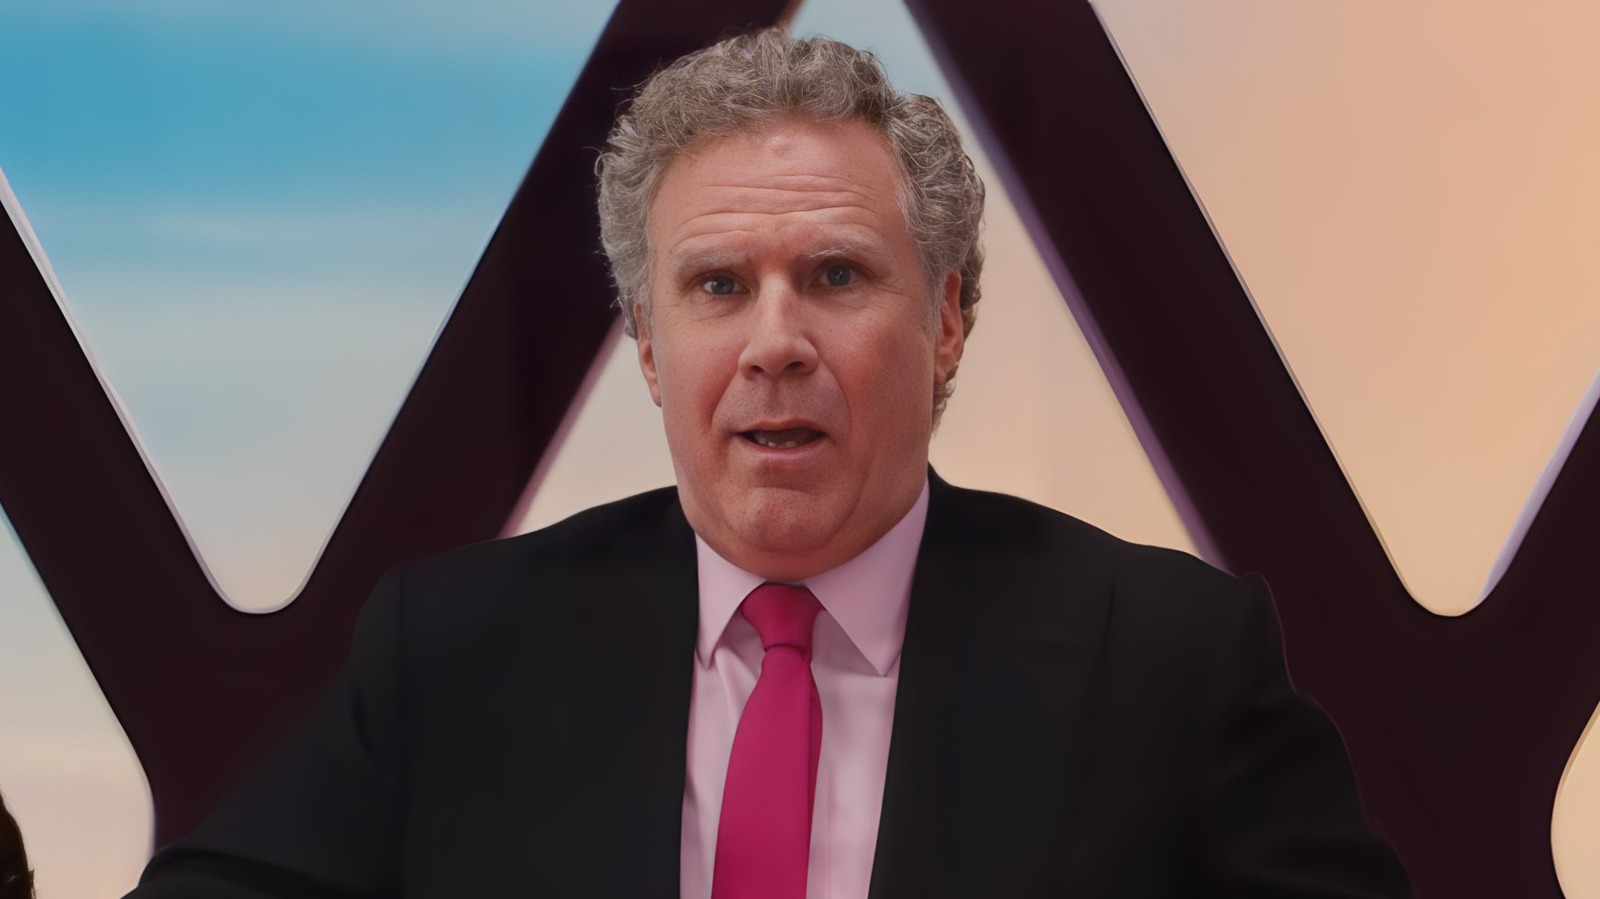 Barbie Teaser Will Ferrell Creates Buzz About His Human Cameos In Toy